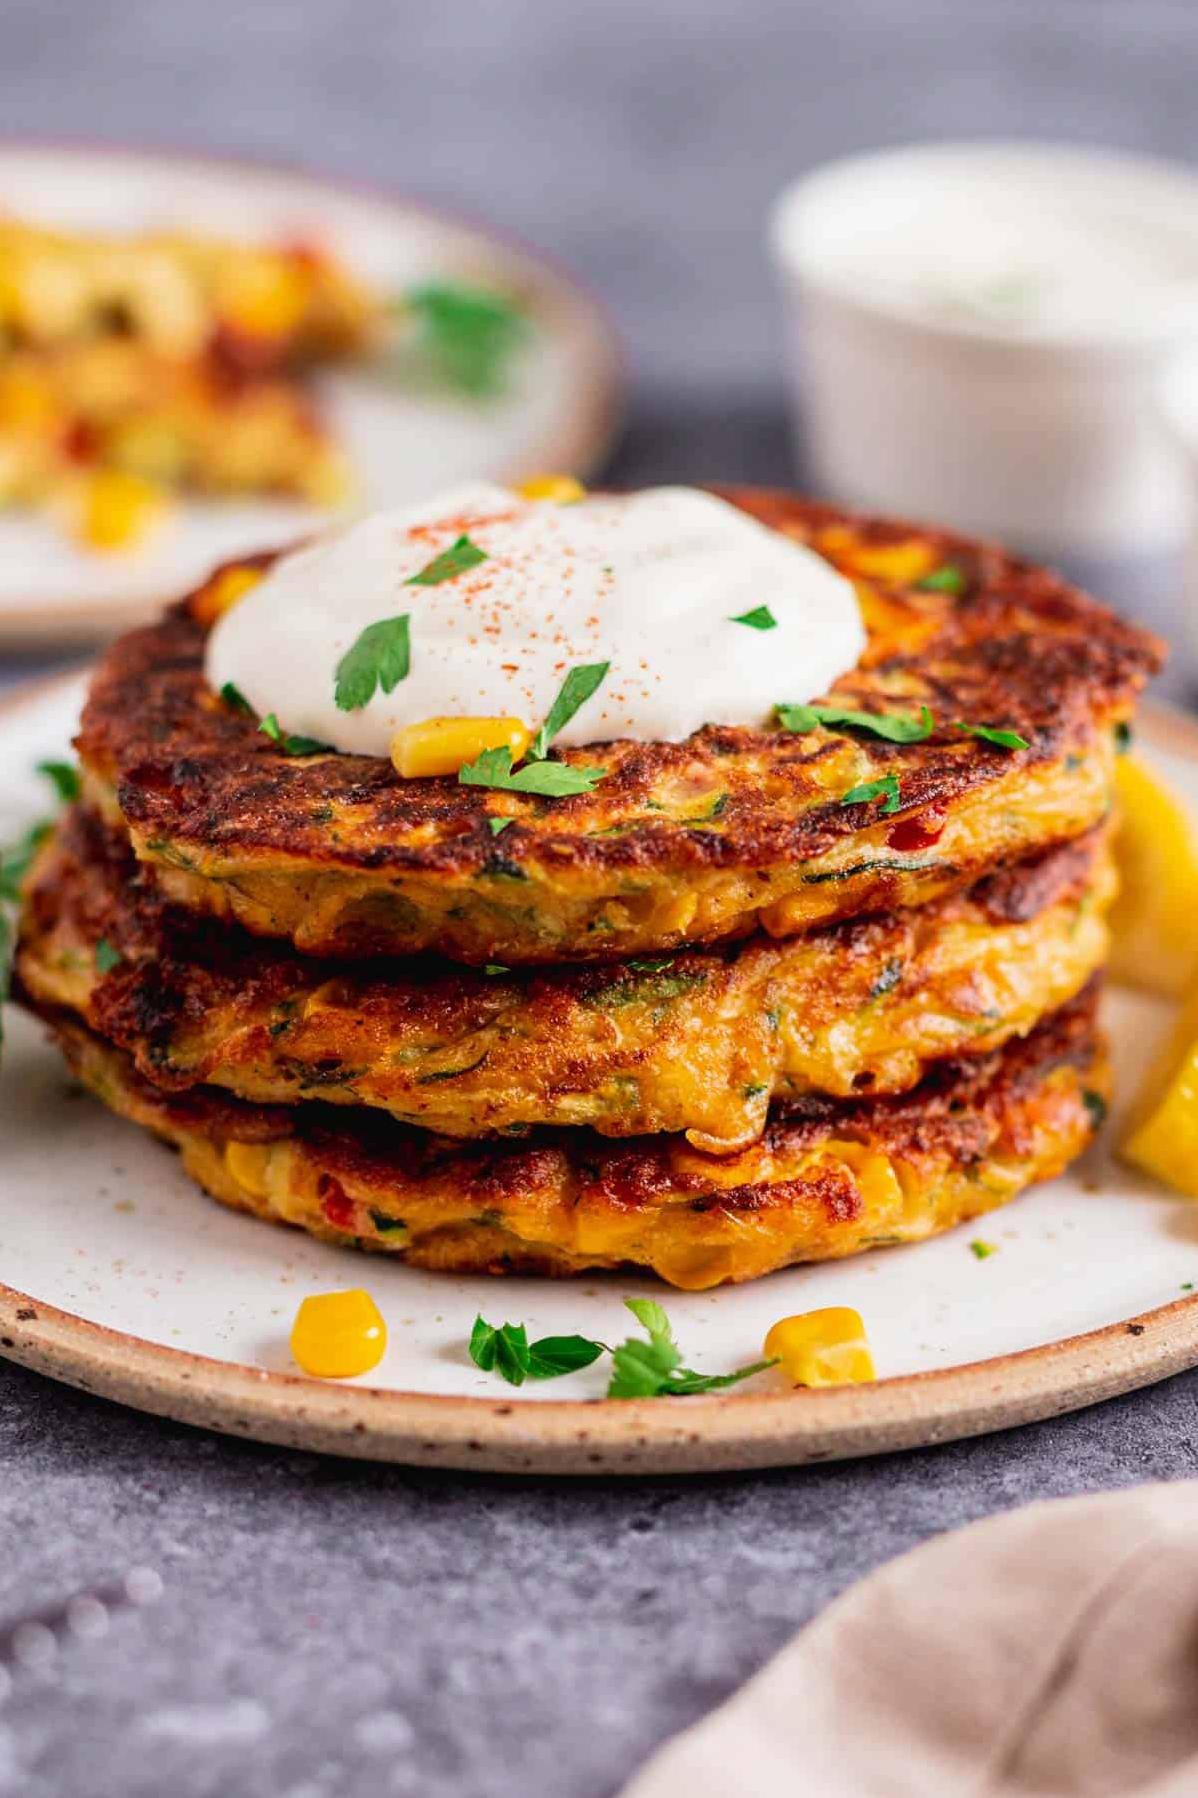  These gluten-free fritters are a healthy alternative to greasy potato chips or onion rings.